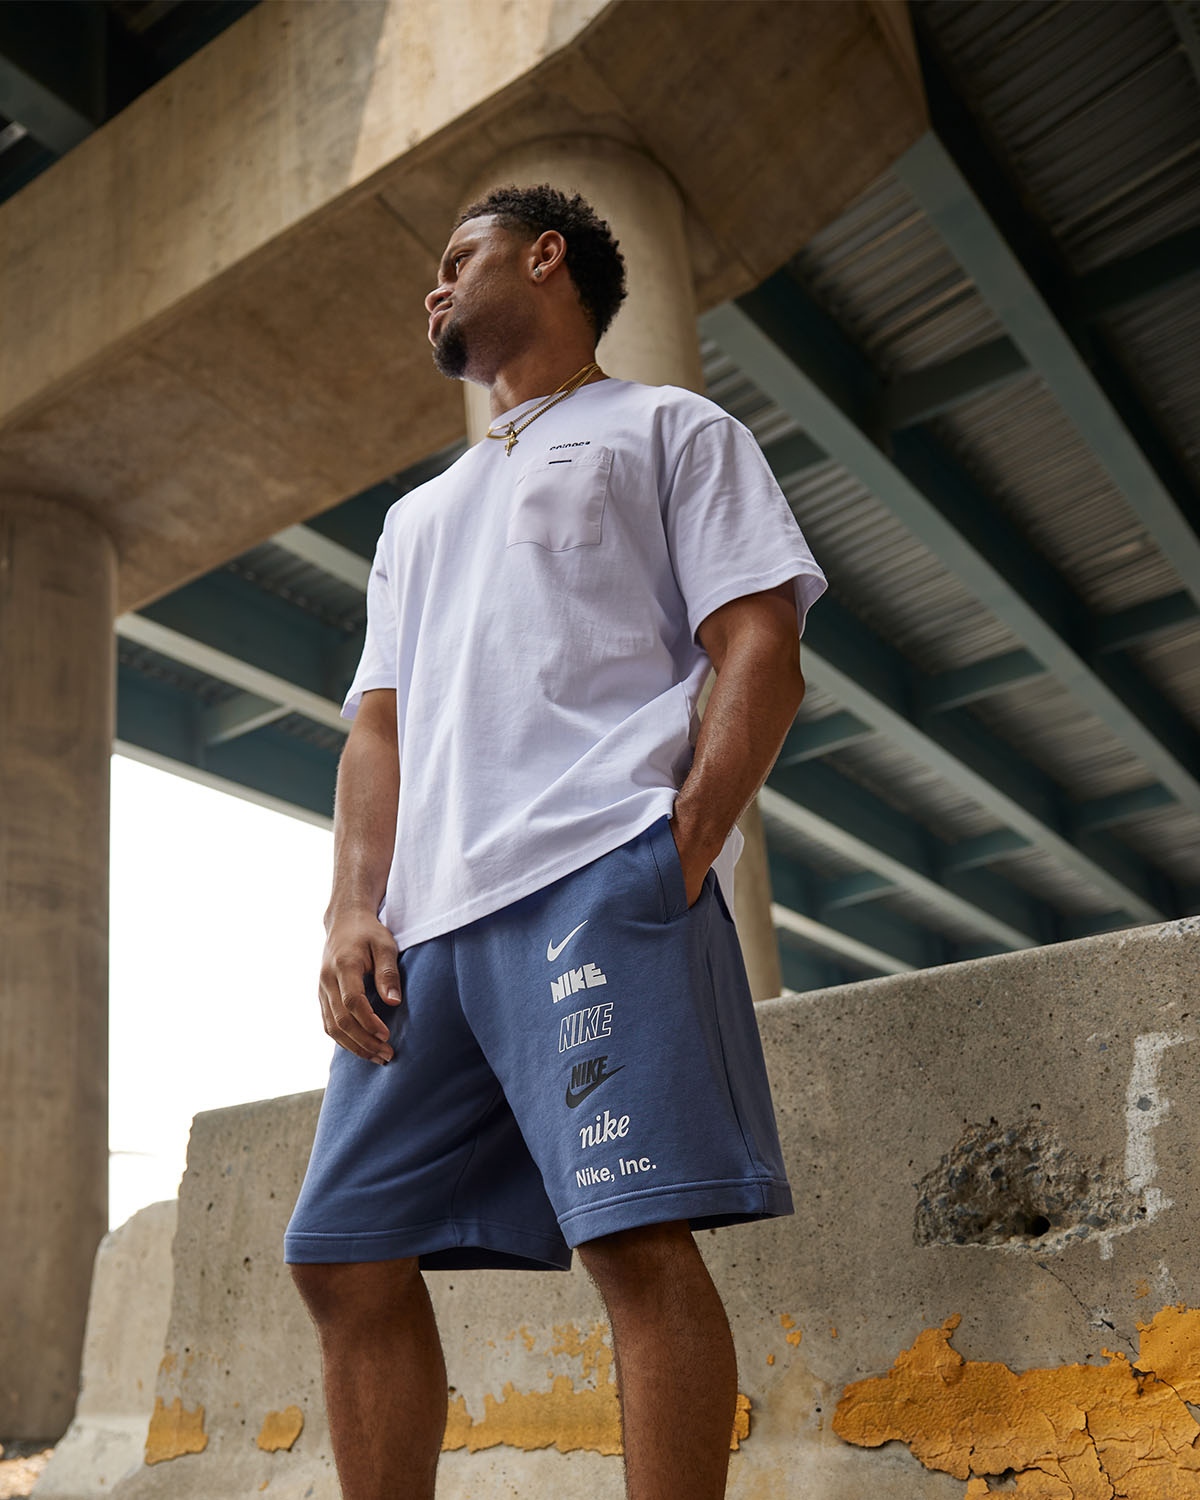 SNIPES_USA on Twitter: "Need to cool it down?! The Nike Sportswear Club Plus Shorts are a must-have to beat the summer heat! Visit https://t.co/7IL0IY5bXH to shop now. #snipesusa #gotitfromsnipes #snipesknows https://t.co/rDF6aBa5Zz" /